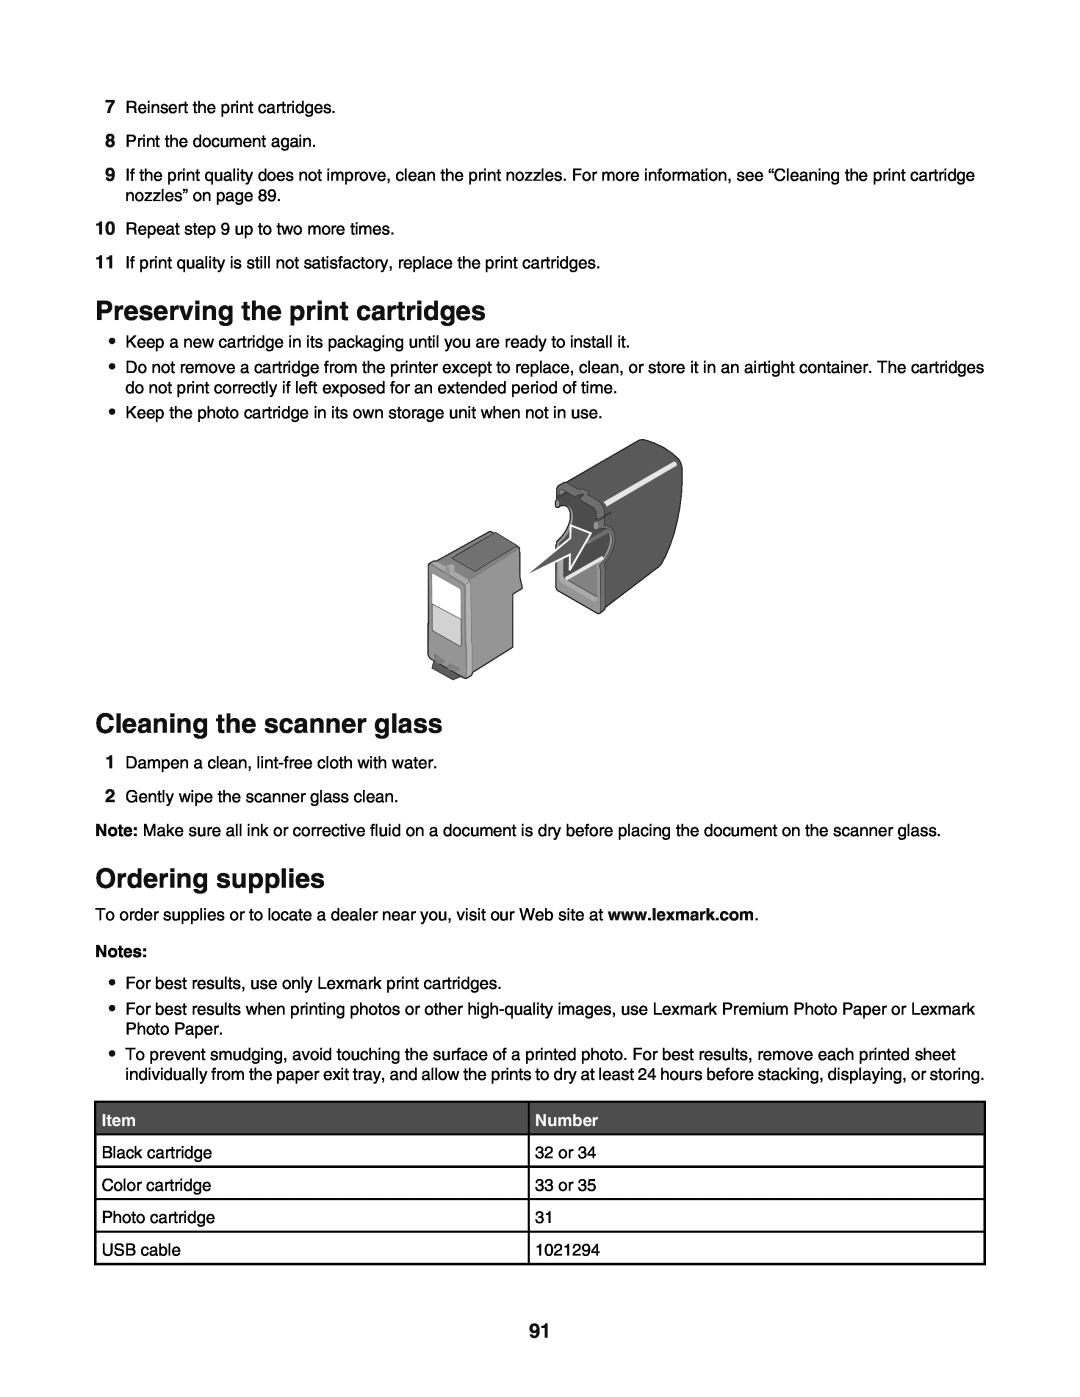 Lexmark 5400 manual Preserving the print cartridges, Cleaning the scanner glass, Ordering supplies, Number 